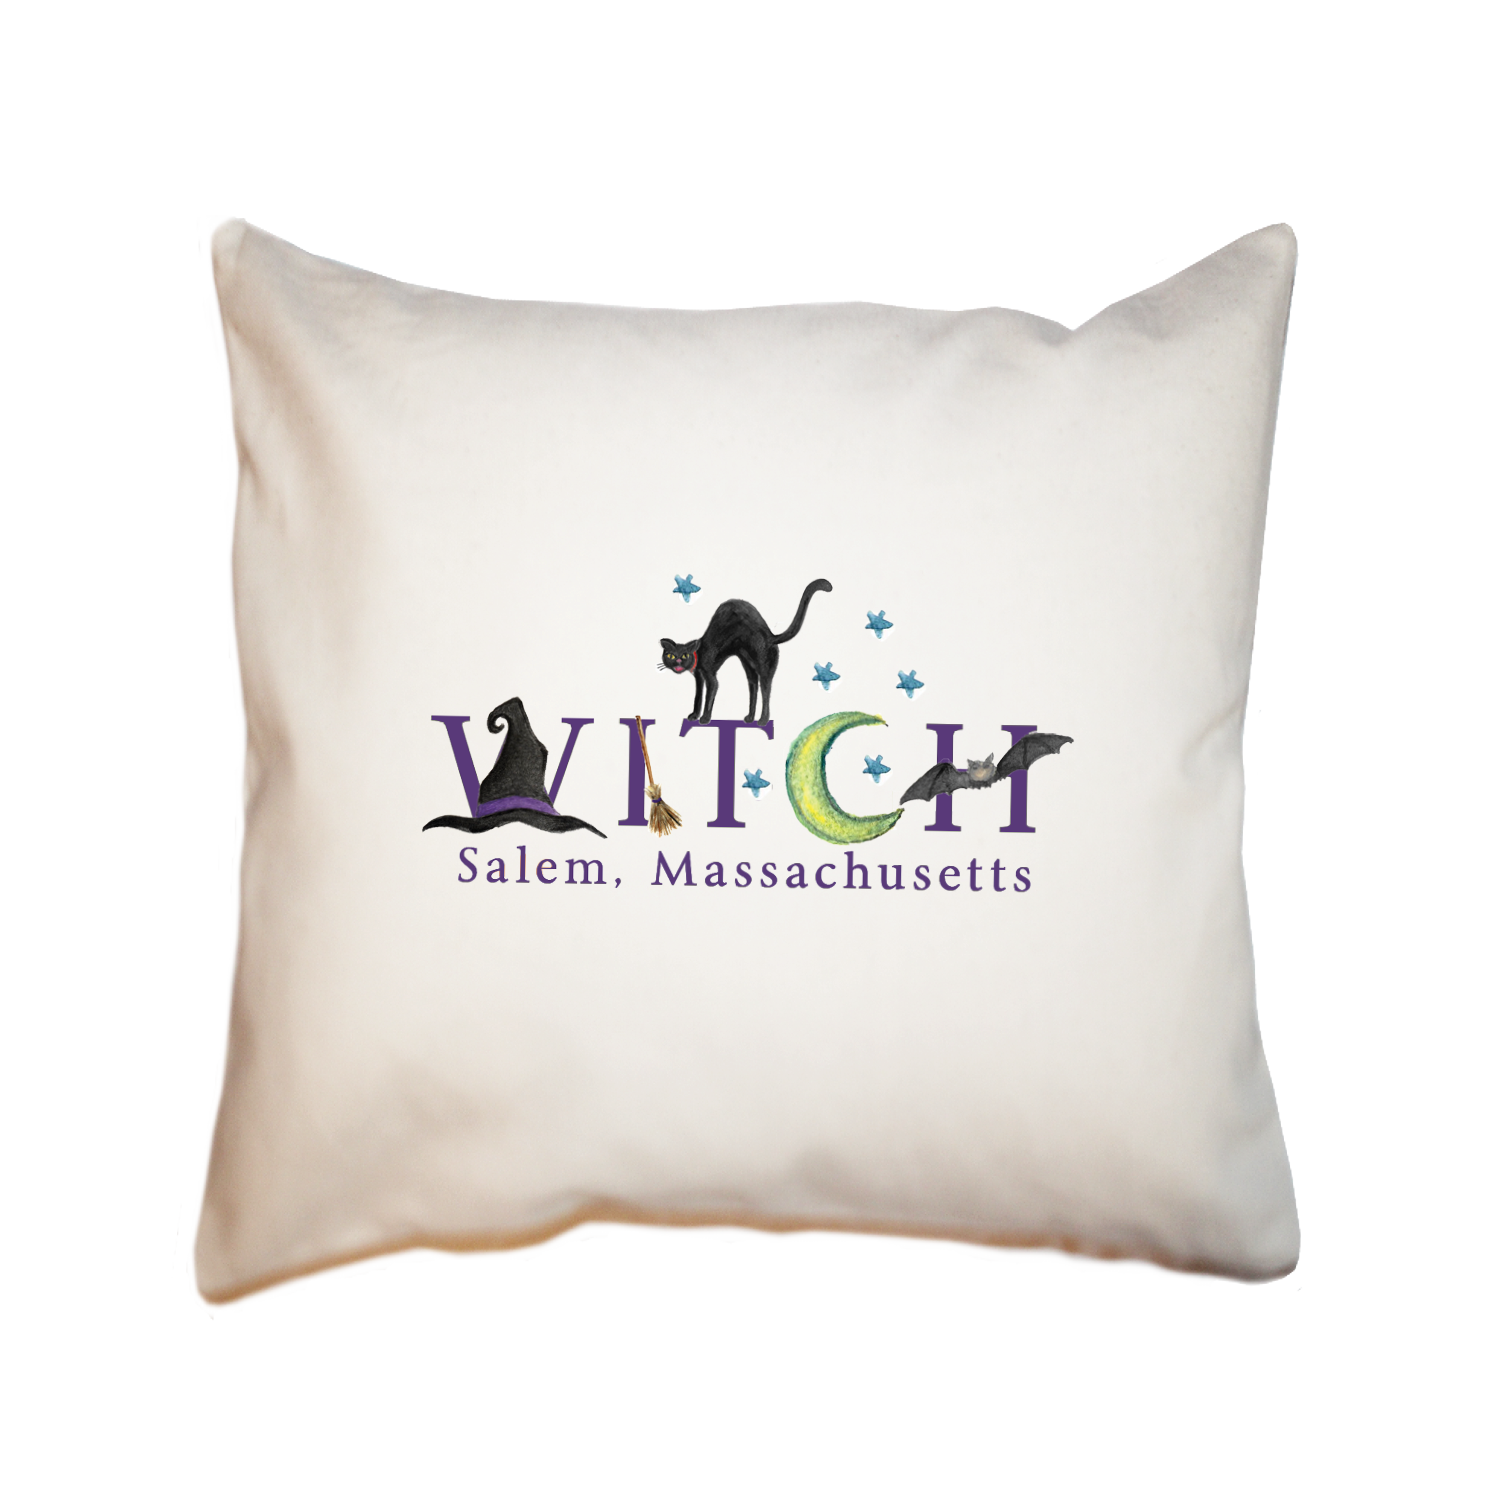 witch salem with black cat square pillow